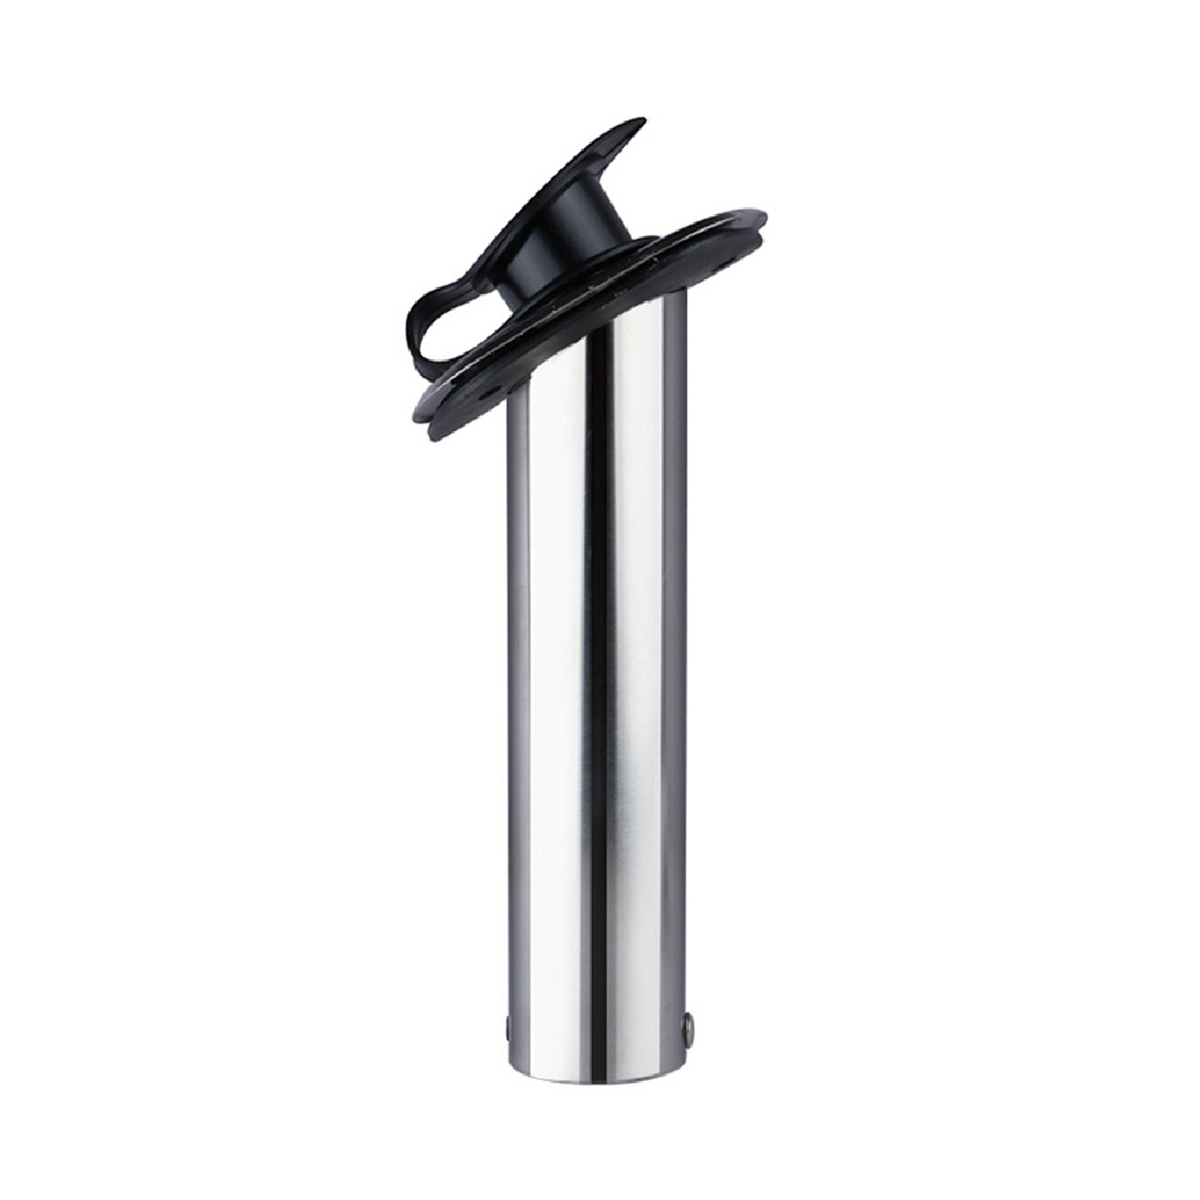 Buy Stand Pancing Stainless Steel online